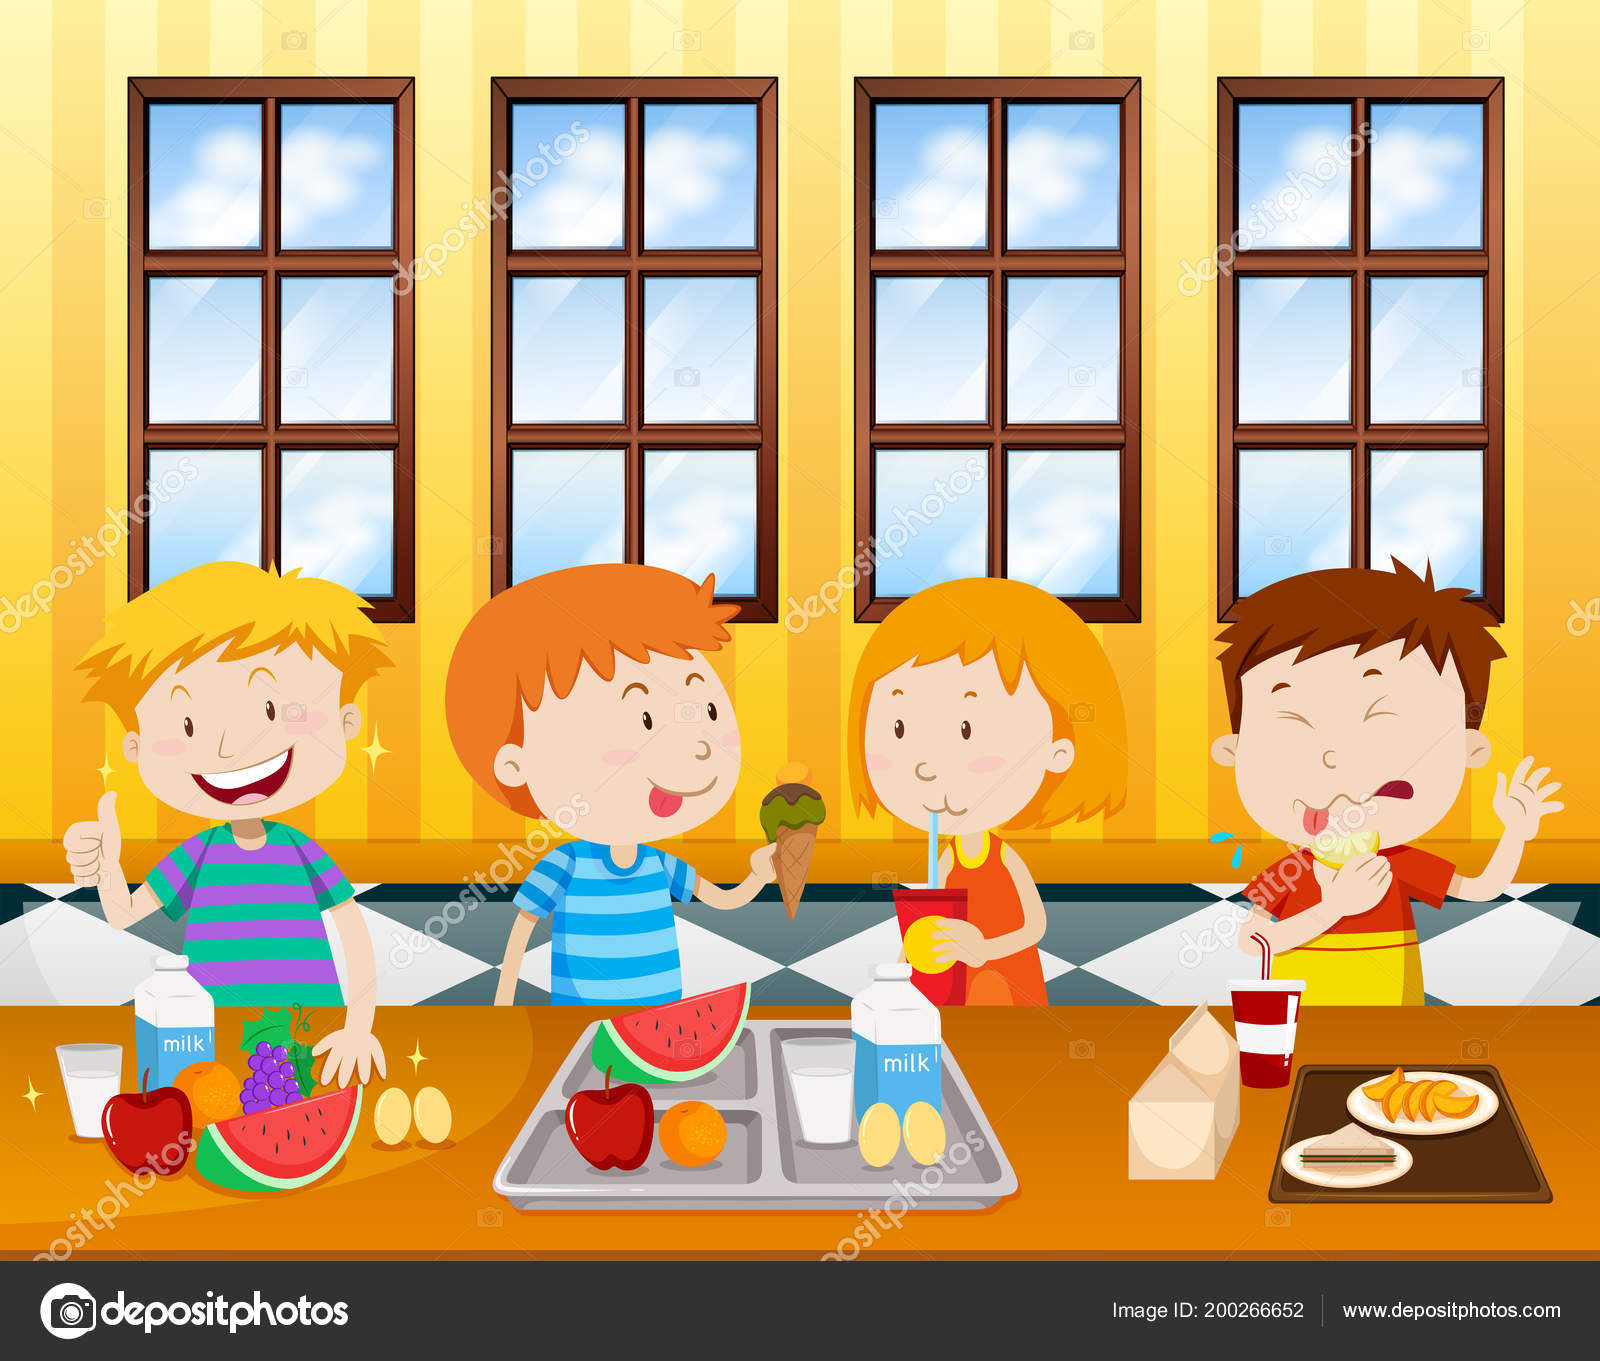 Children Eating Cafeteria Illustration Stock Vector Image by ©blueringmedia  #200266652